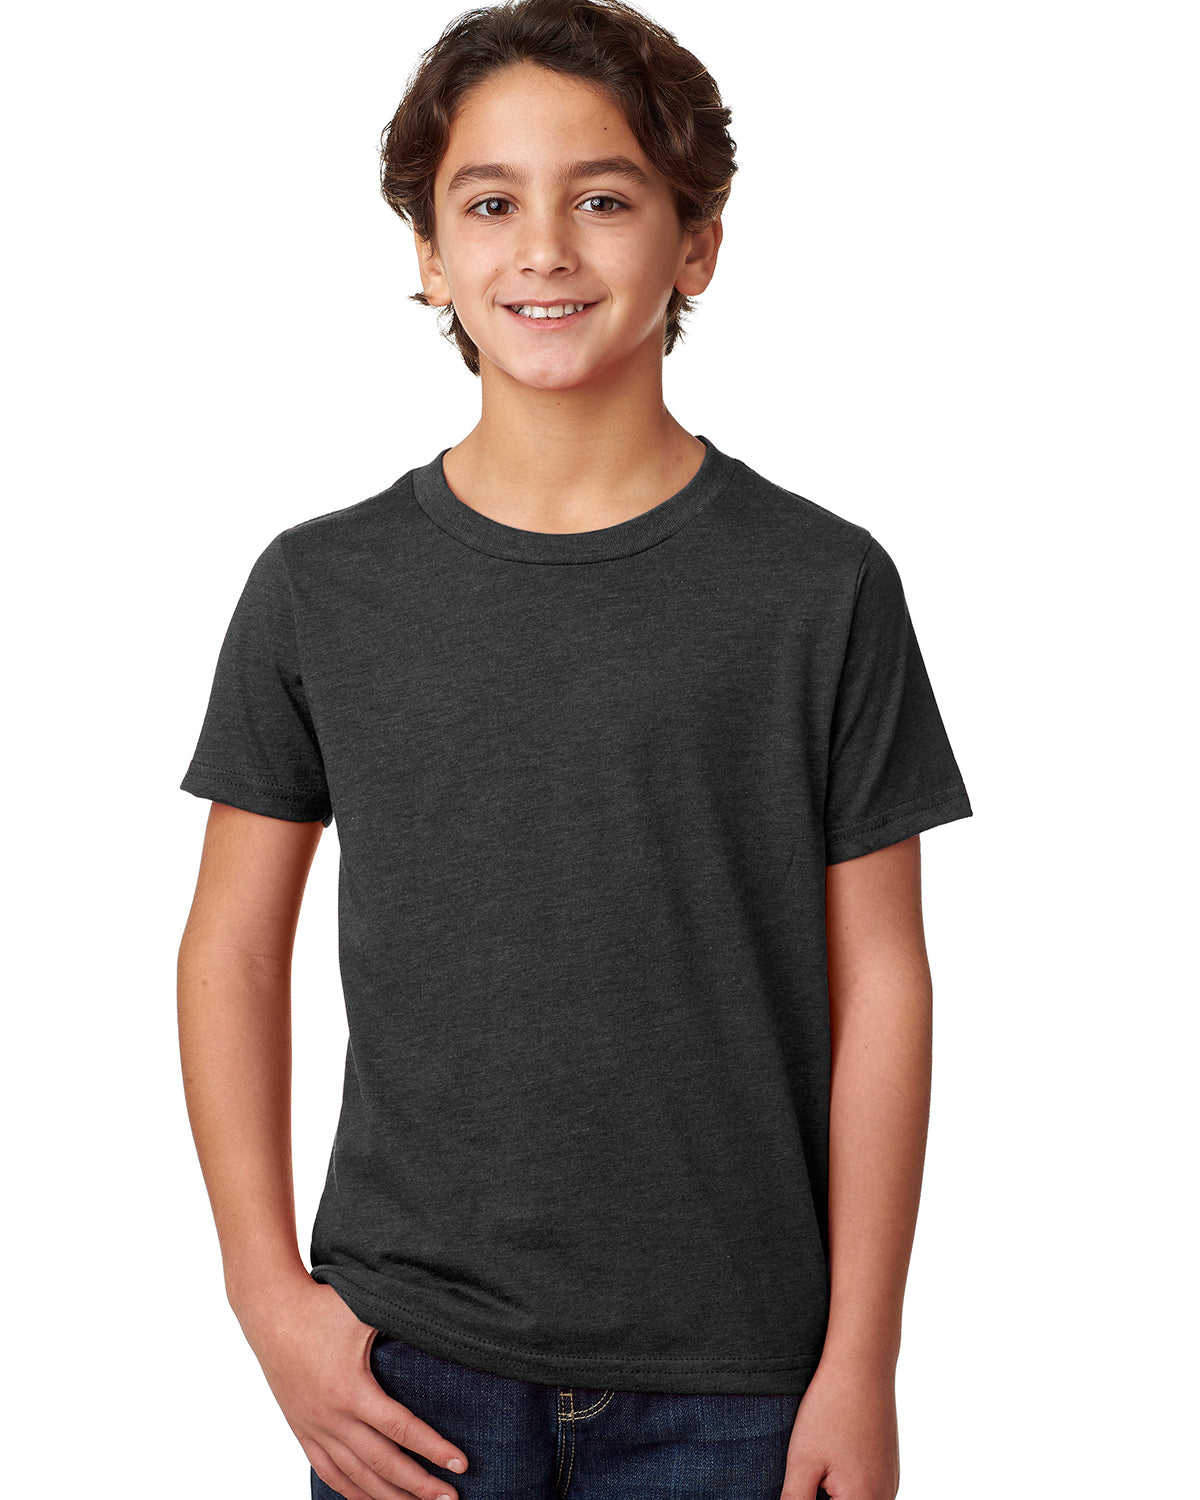 child model wearing next level youth CVC tee in charcoal